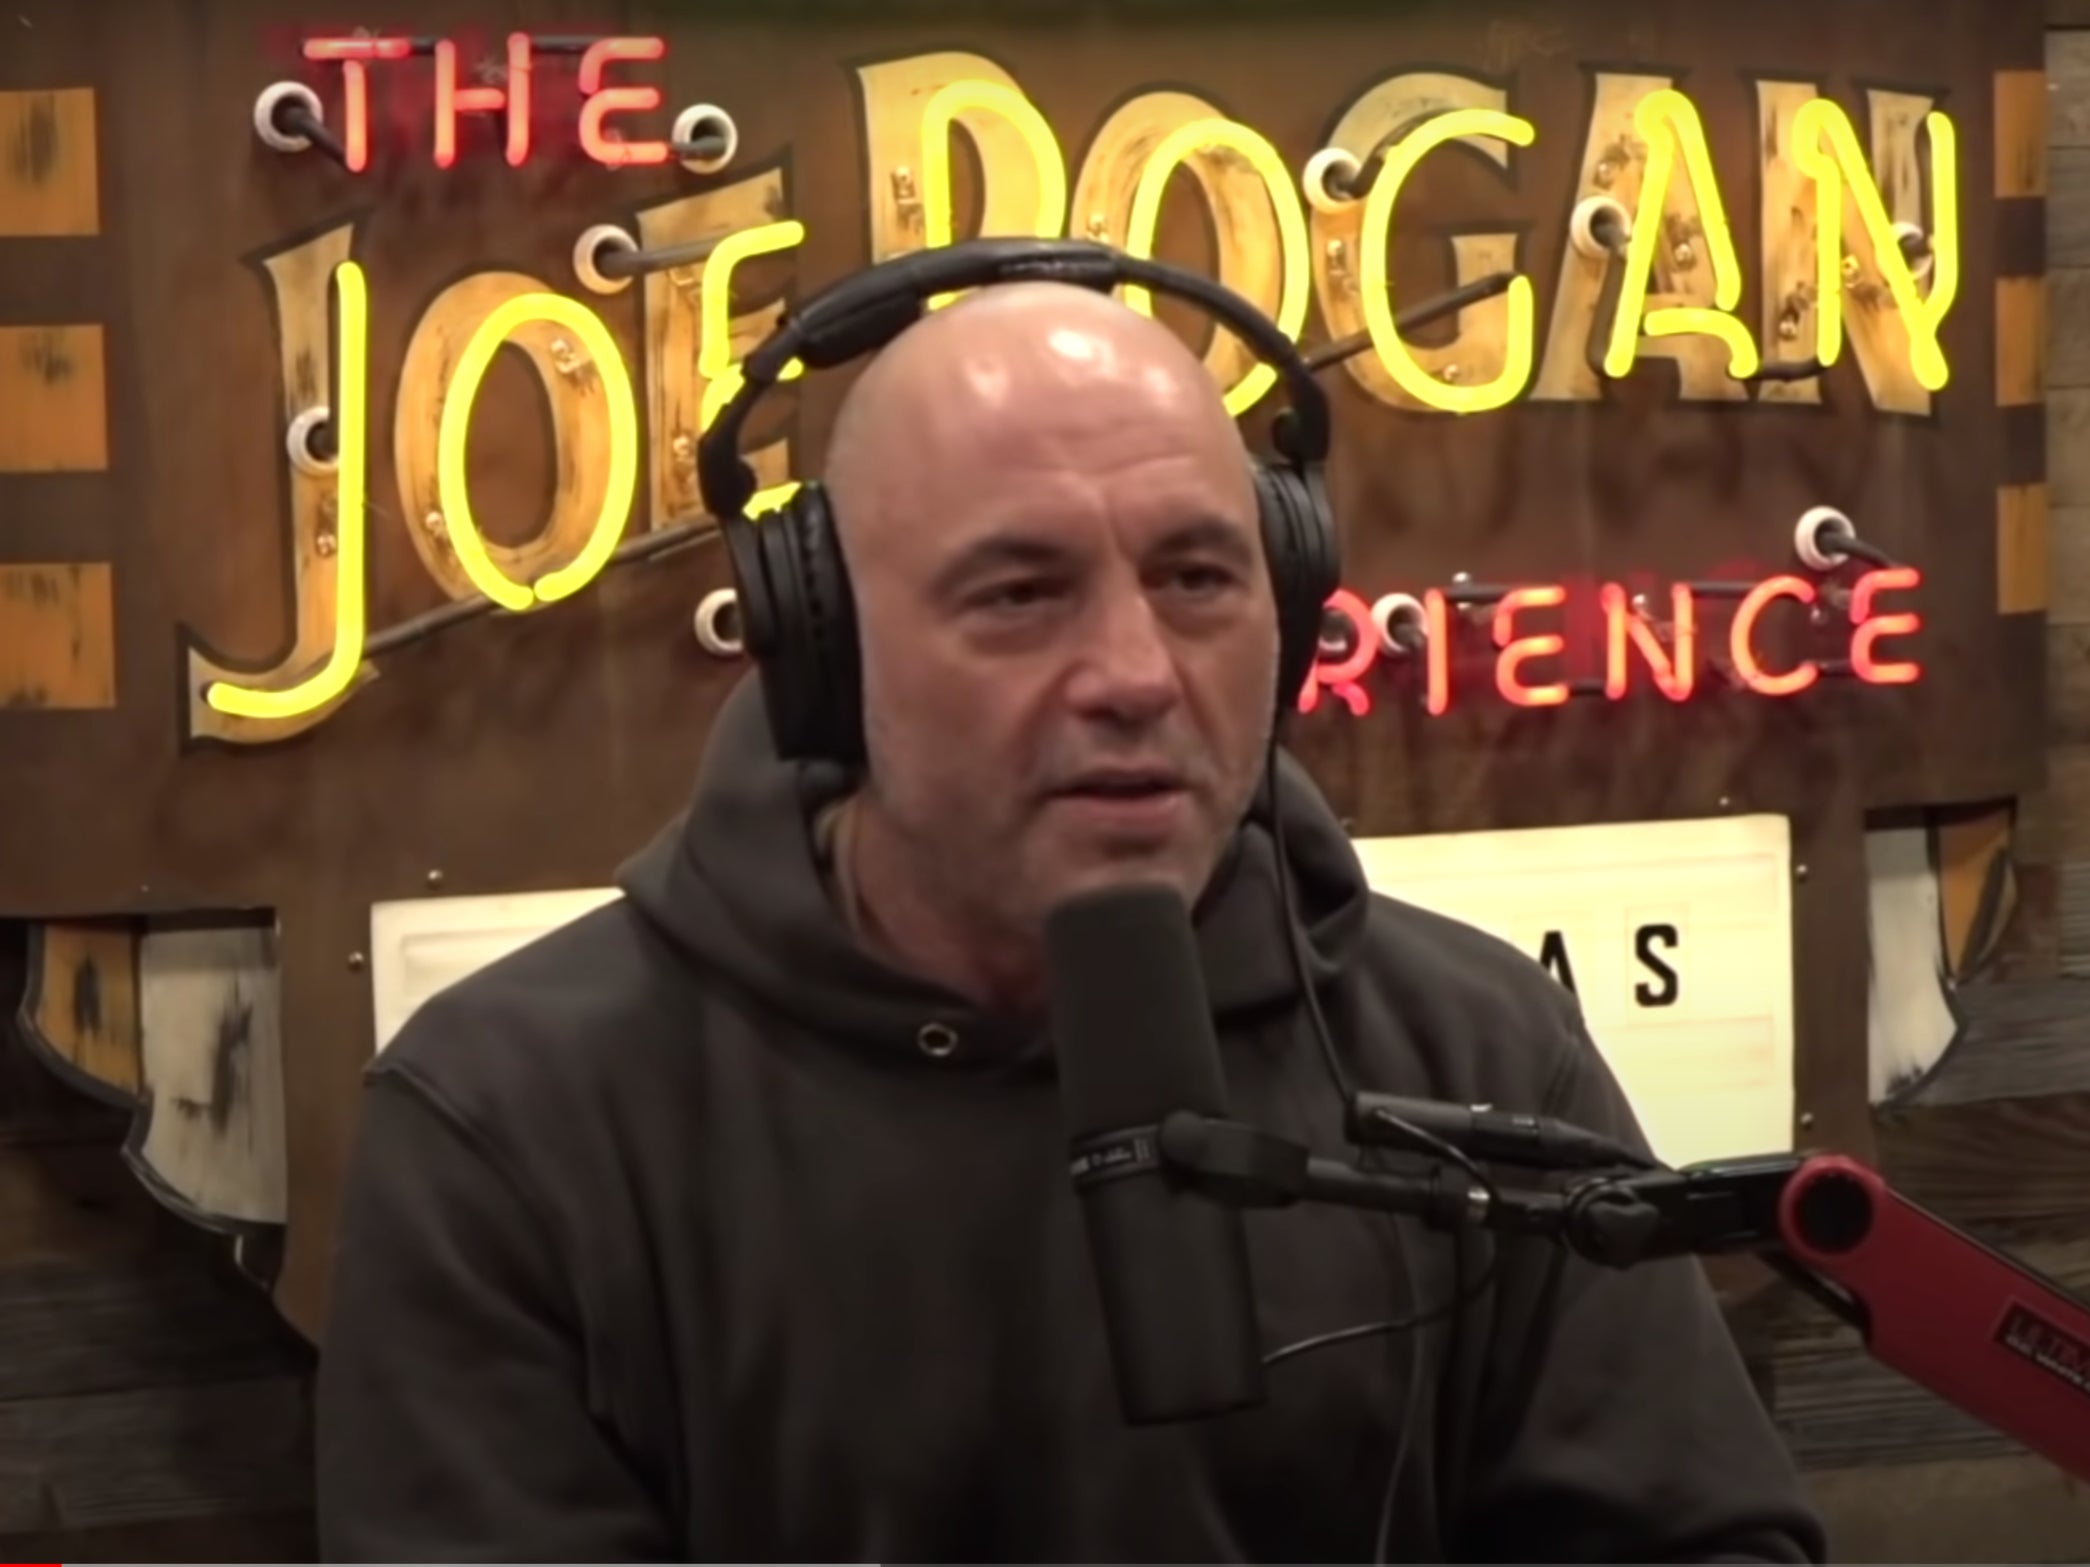 Joe Rogan caused massive outrage again, after speaking about child sex abuse on his widely polarising podcast